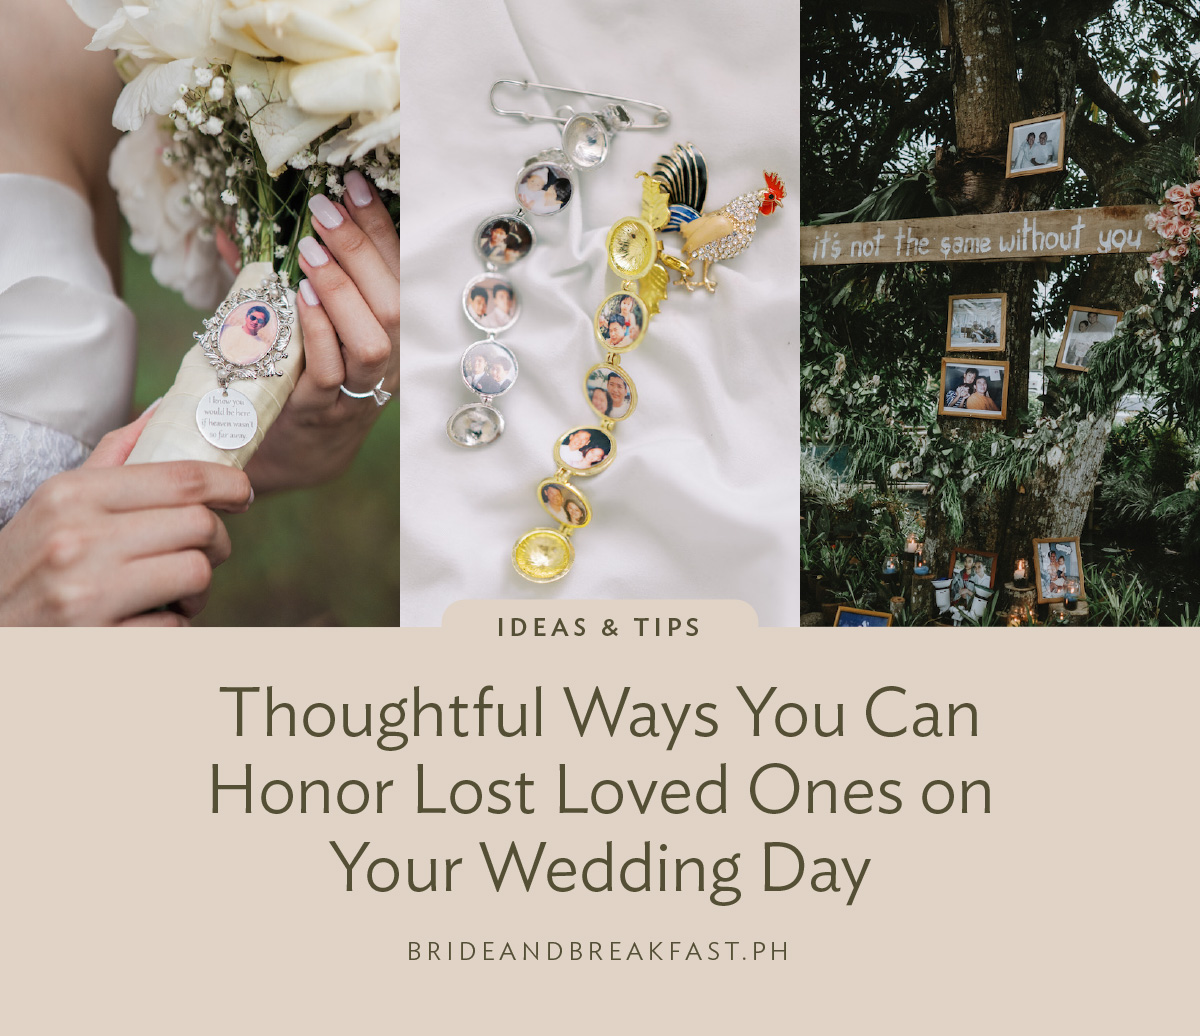 8 Thoughtful Ways You Can Honor Lost Loved Ones on Your Wedding Day (Part 2)